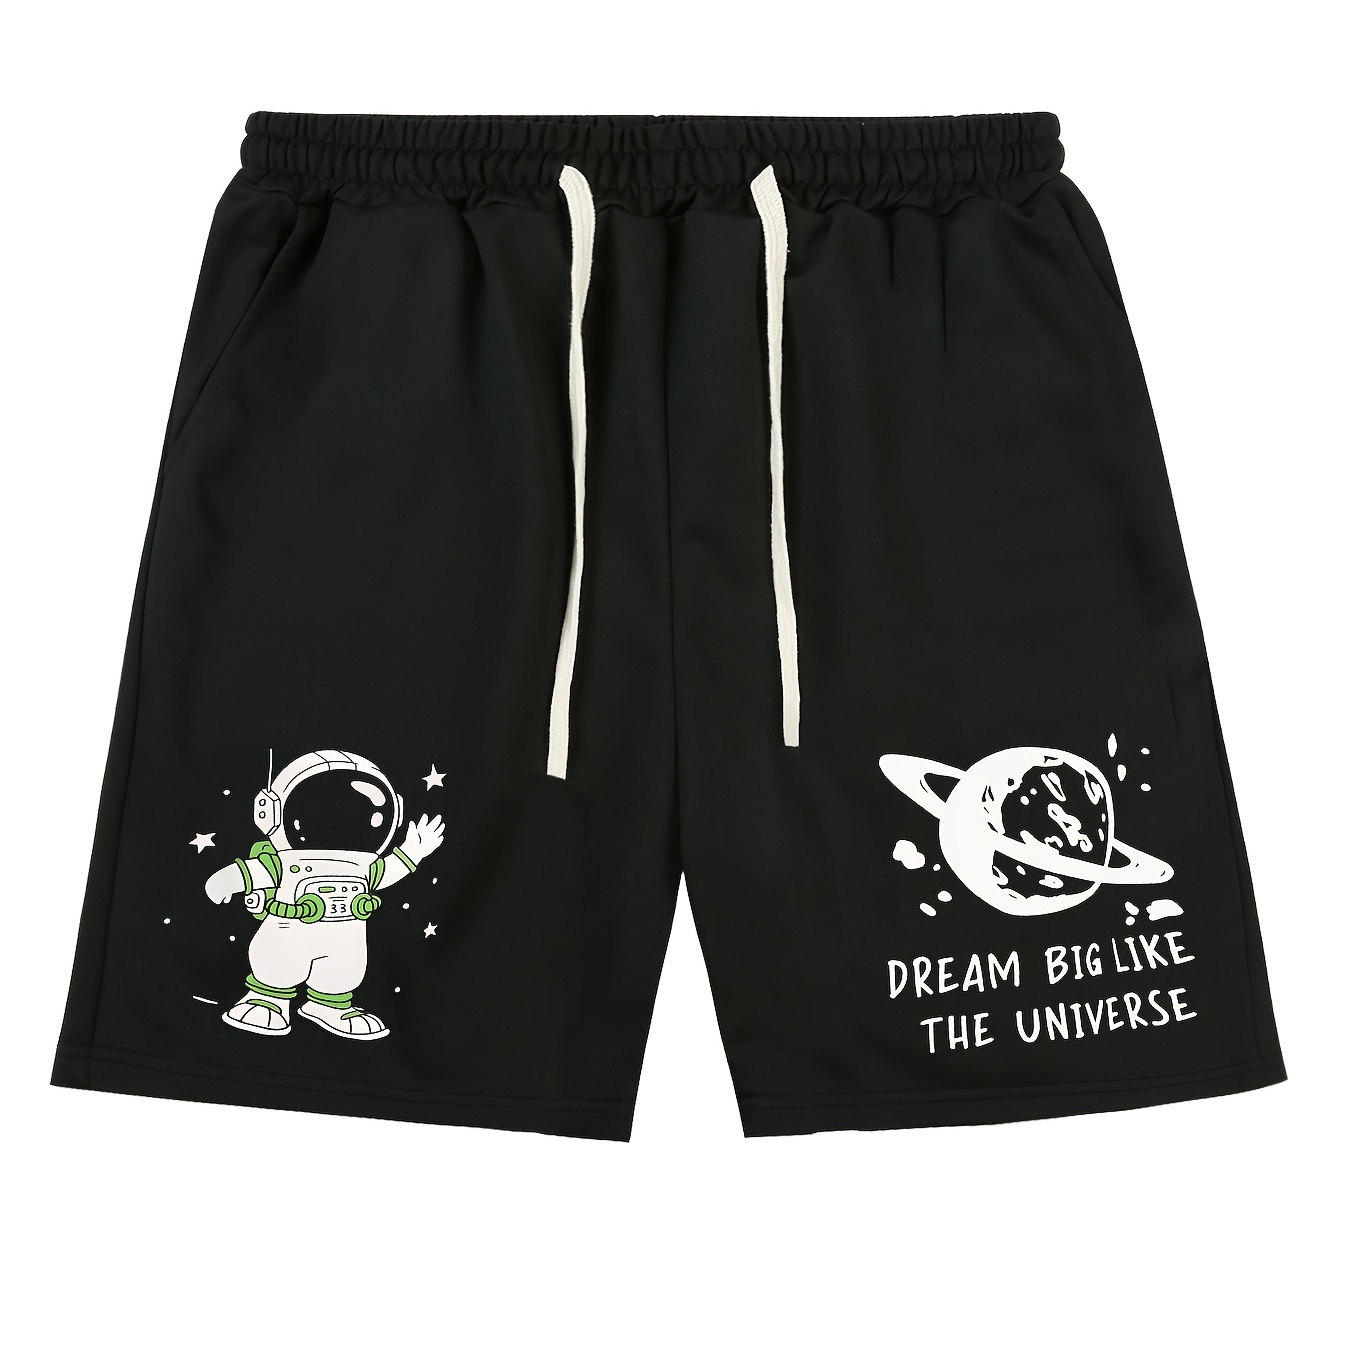 

Men's Casual Trendy Drawstrings Shorts With Astronaut Planet Print For Summer Outdoor Sports